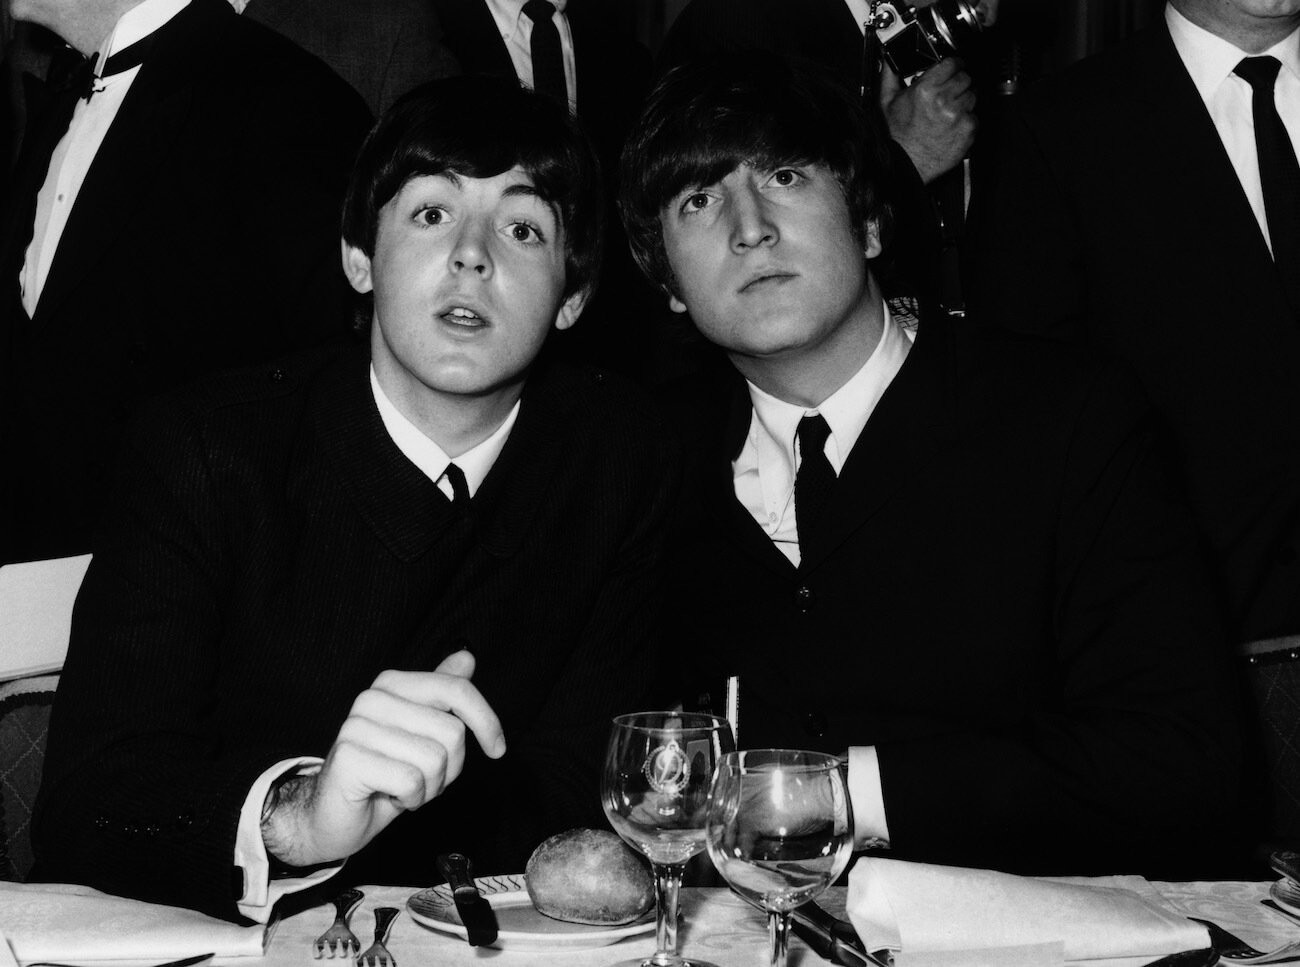 Paul McCartney and John Lennon at the Variety Club Showbusiness Awards in 1964.